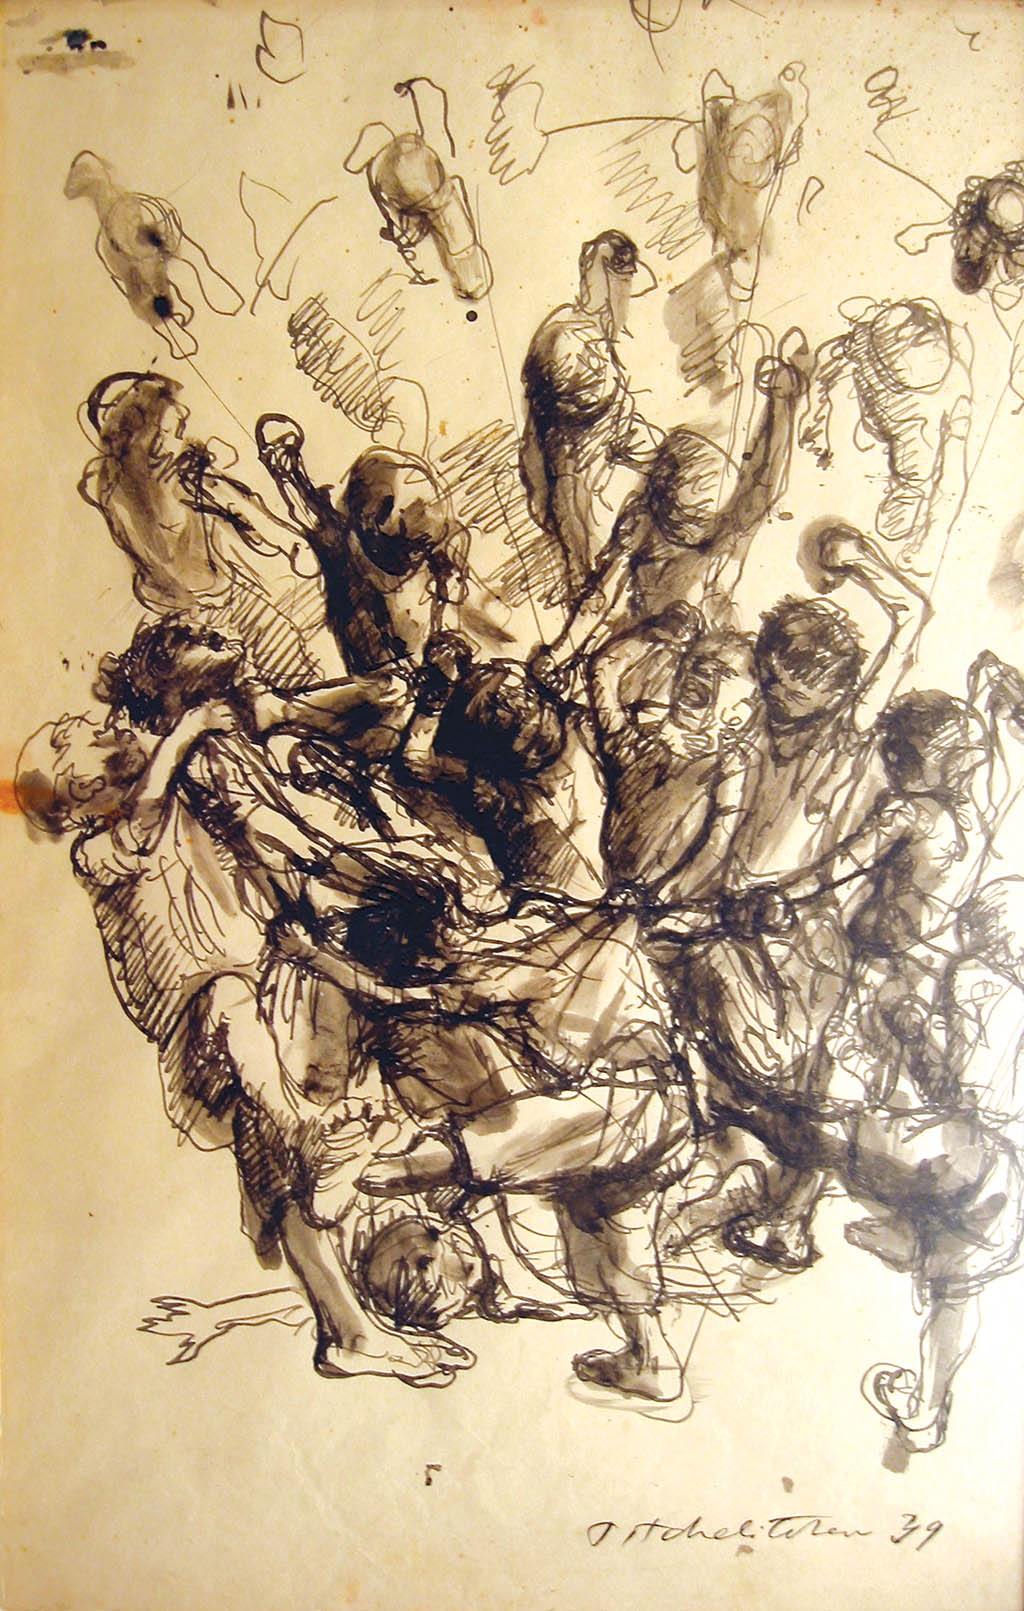 Pavel Tchelitchew - Study for The Whirlwind - 1939 ink and wash on paper